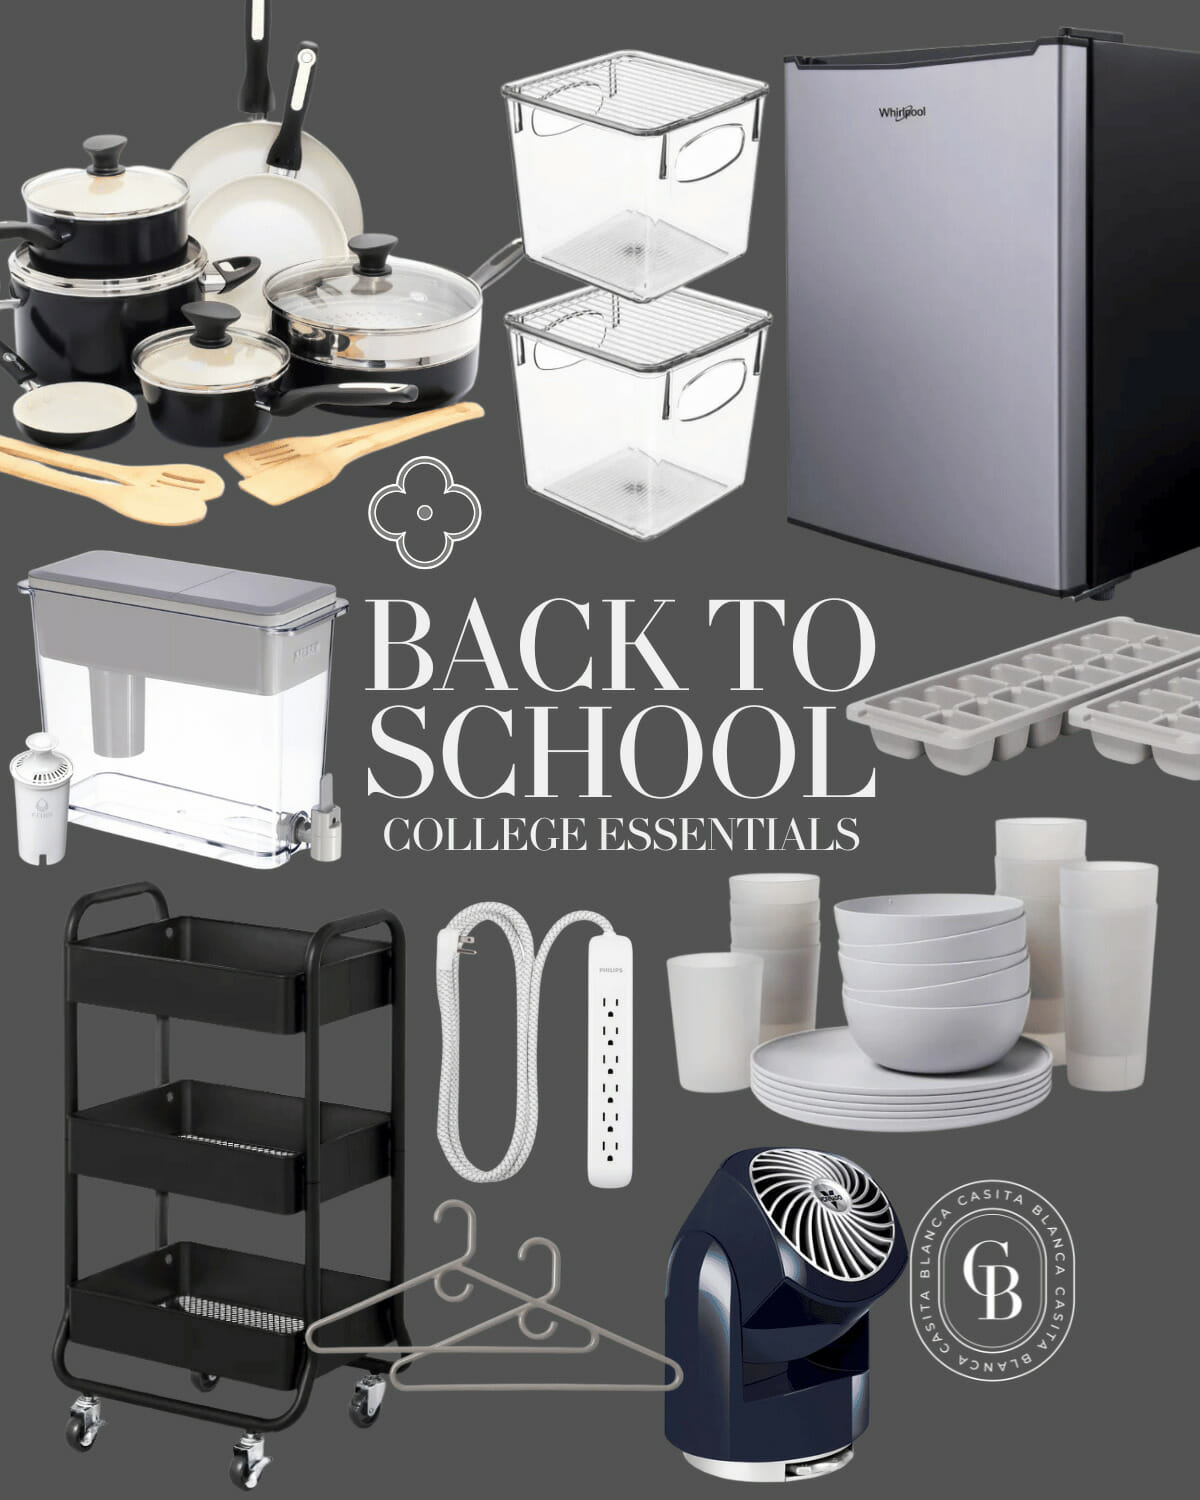 Back to School | Dorm and College Finds home decor, storage, home appliances, affordable back to school finds